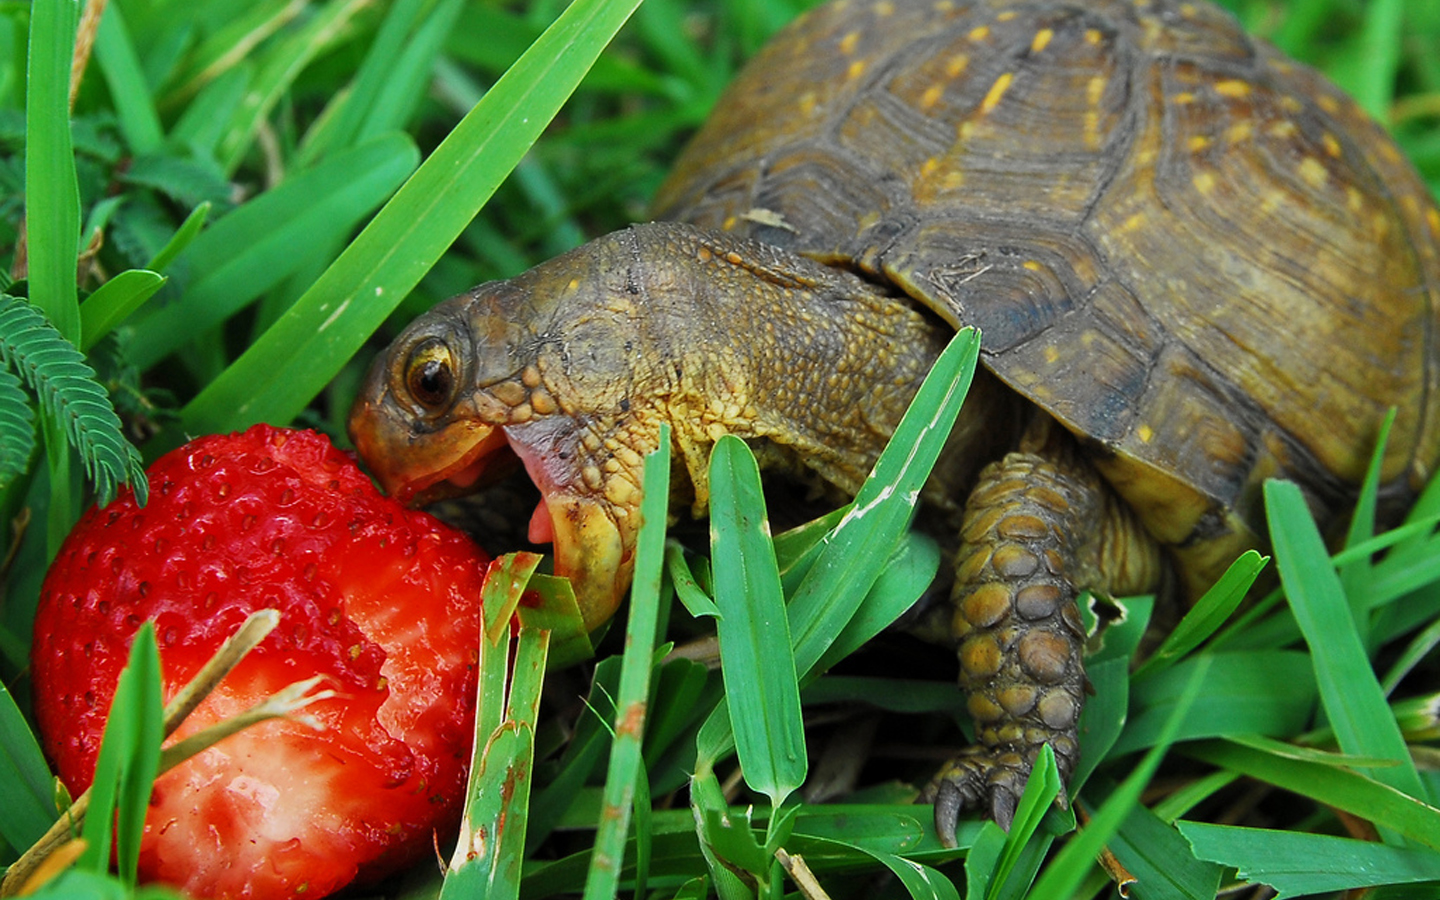  The painting shows a turtle that eats ripe strawberry